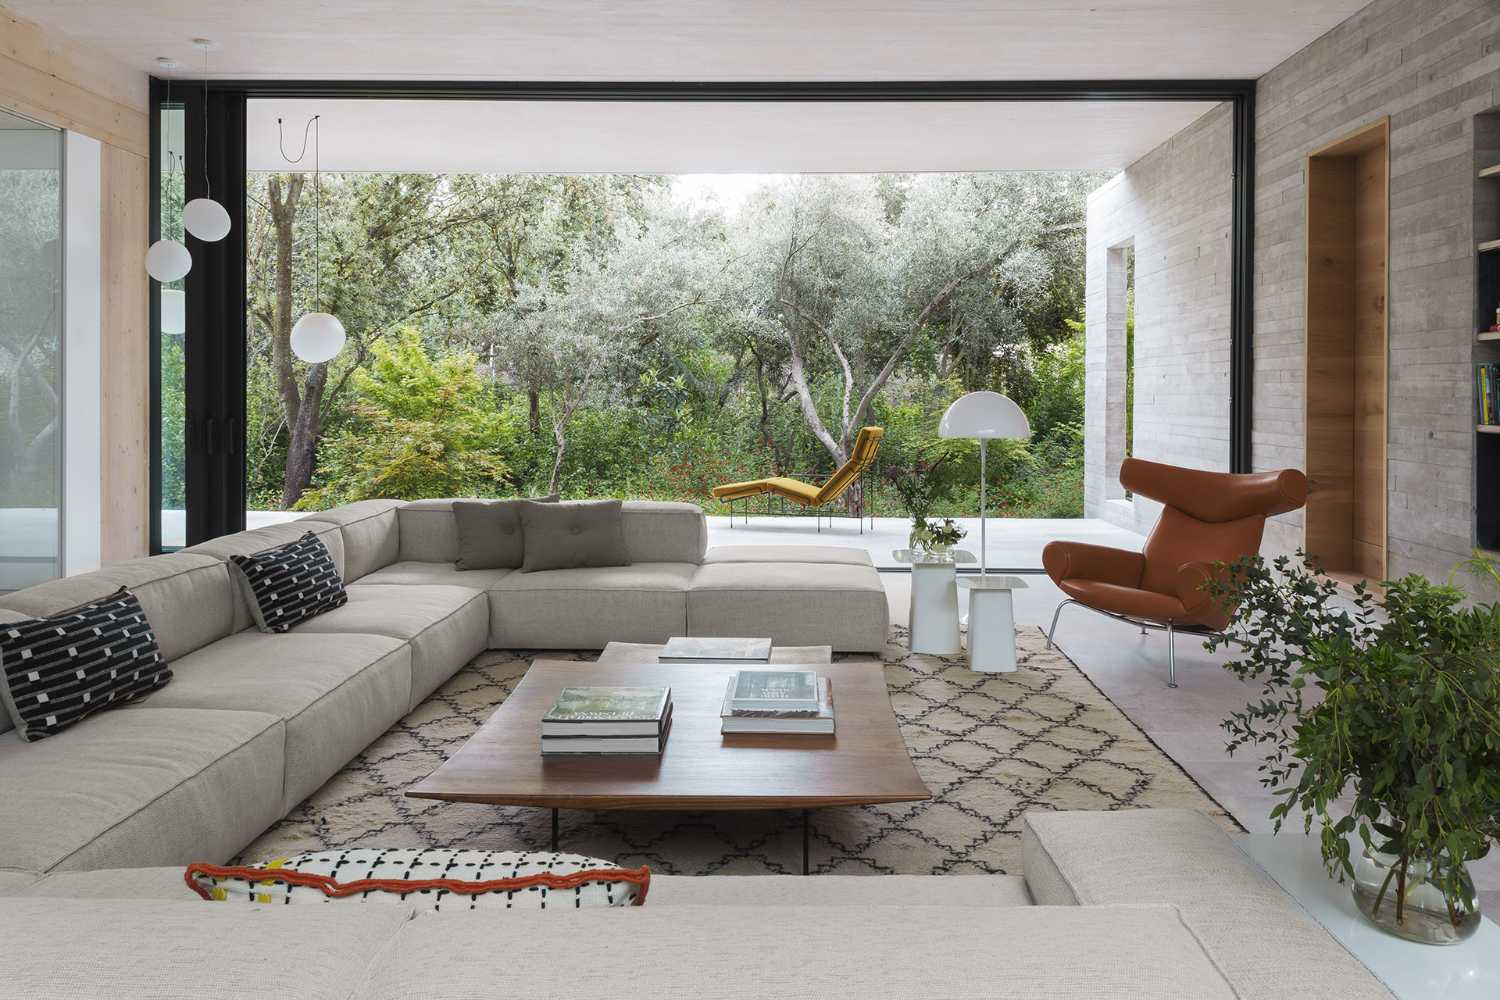 Progetto CH, a private residence intertwined with cosy interiors and verdant outdoor spaces